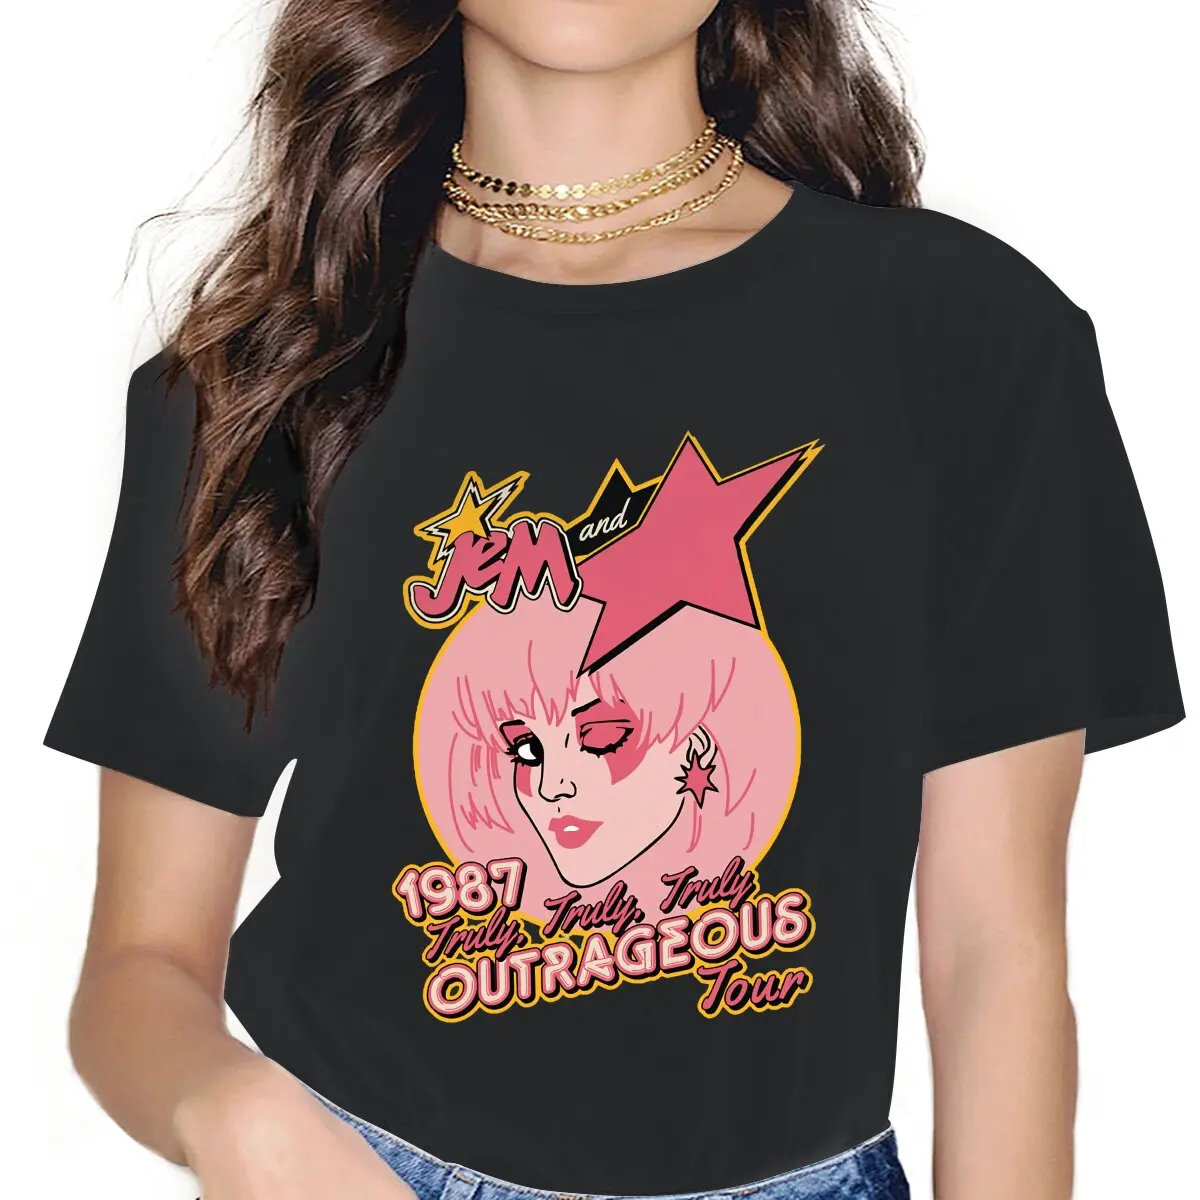 

Fun Tour Classic T-Shirt for Women Crew Neck Cotton T Shirts Jem And The Holograms TV Short Sleeve Tee Shirt Gift Clothes